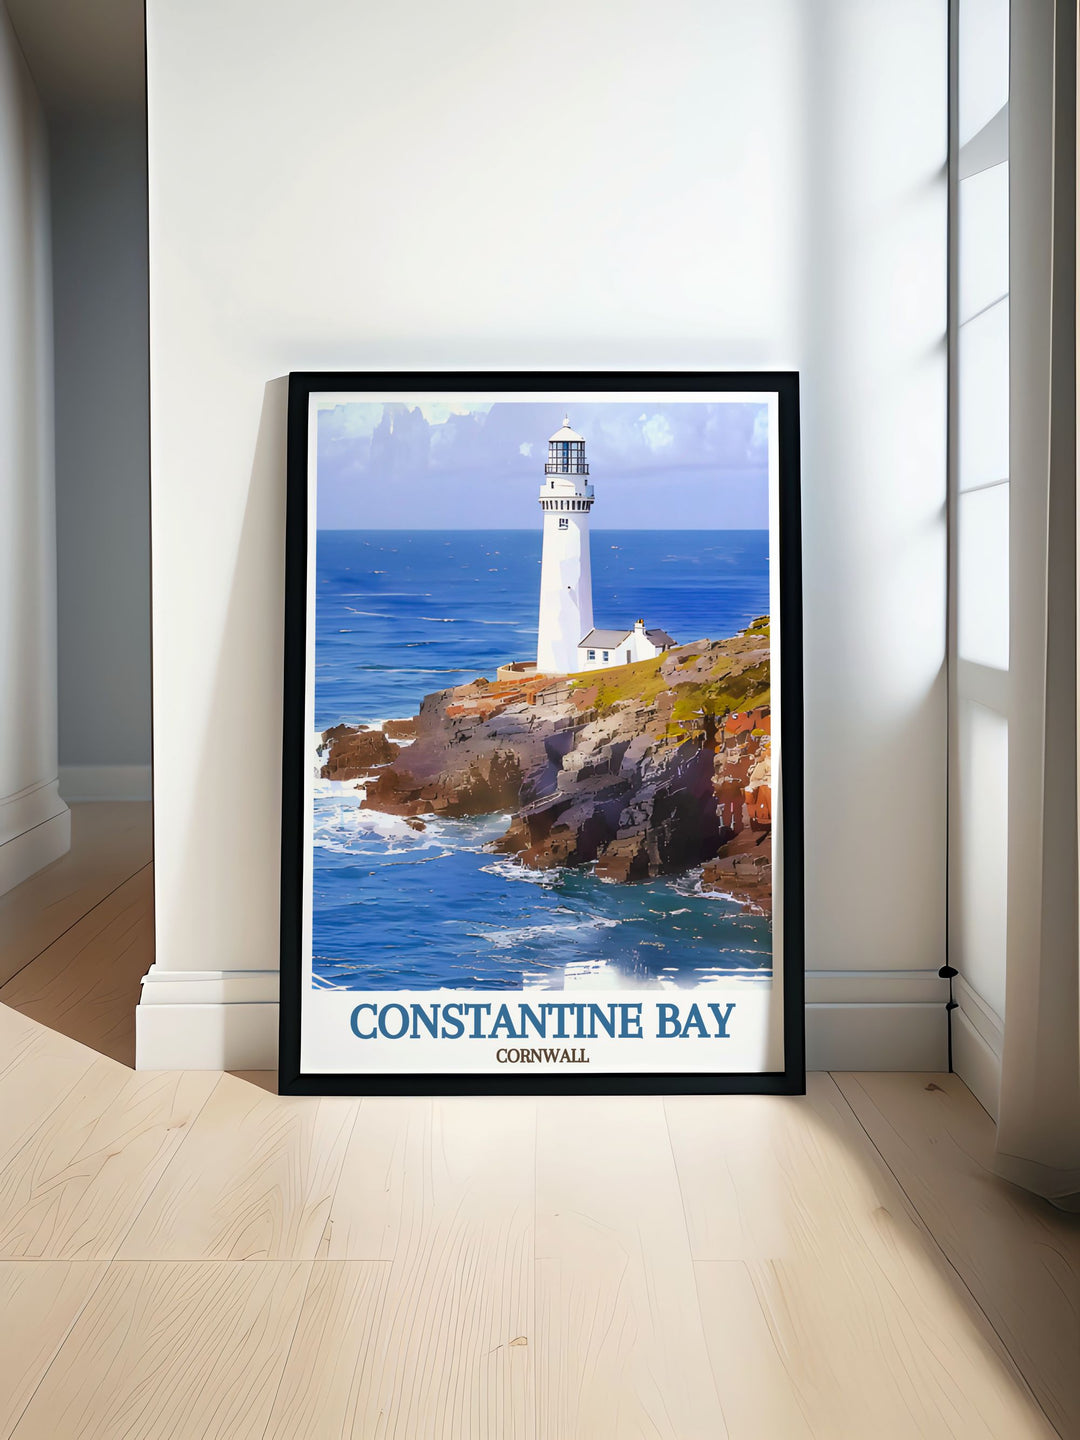 Explore the serene landscapes of Constantine Bay, part of Cornwalls stunning coastline. The beach offers excellent surf conditions, beautiful golden sands, and a peaceful environment perfect for families, surfers, and nature lovers alike.